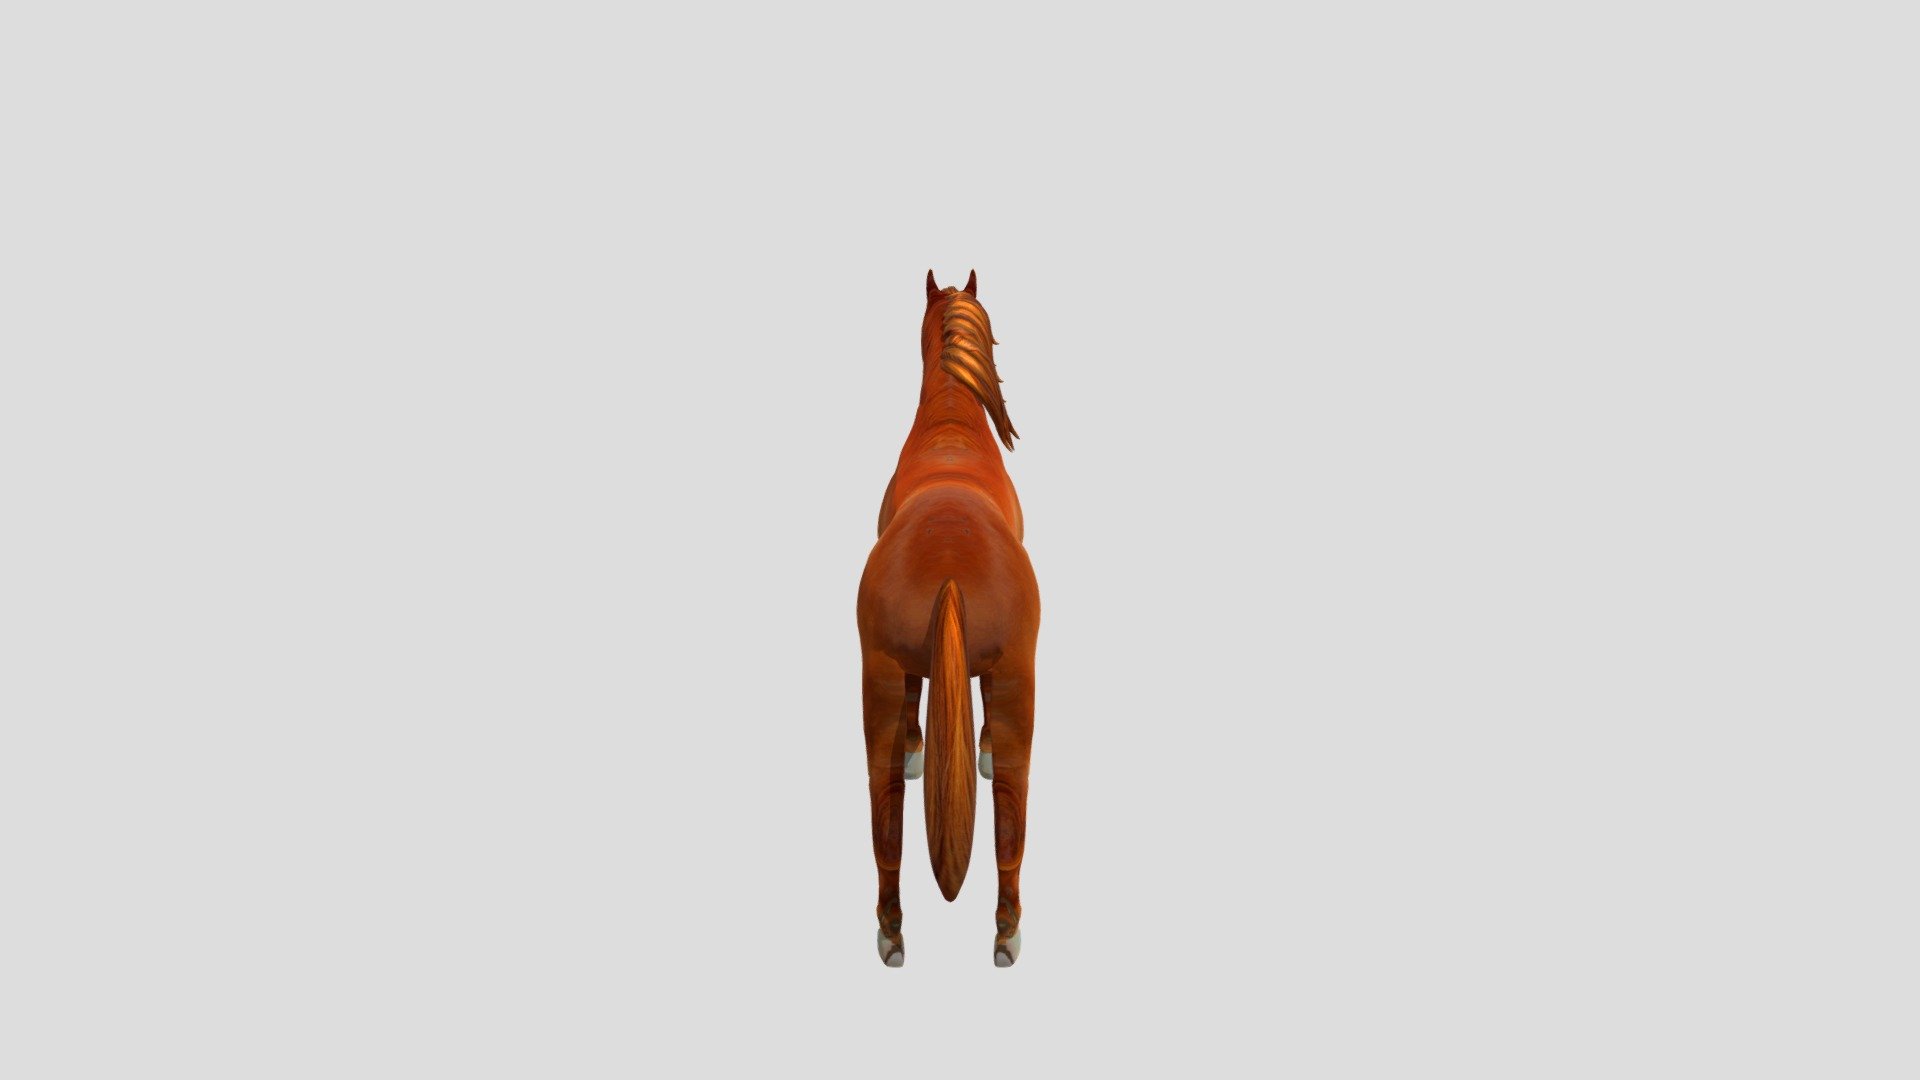 this is my first attempt at a horse